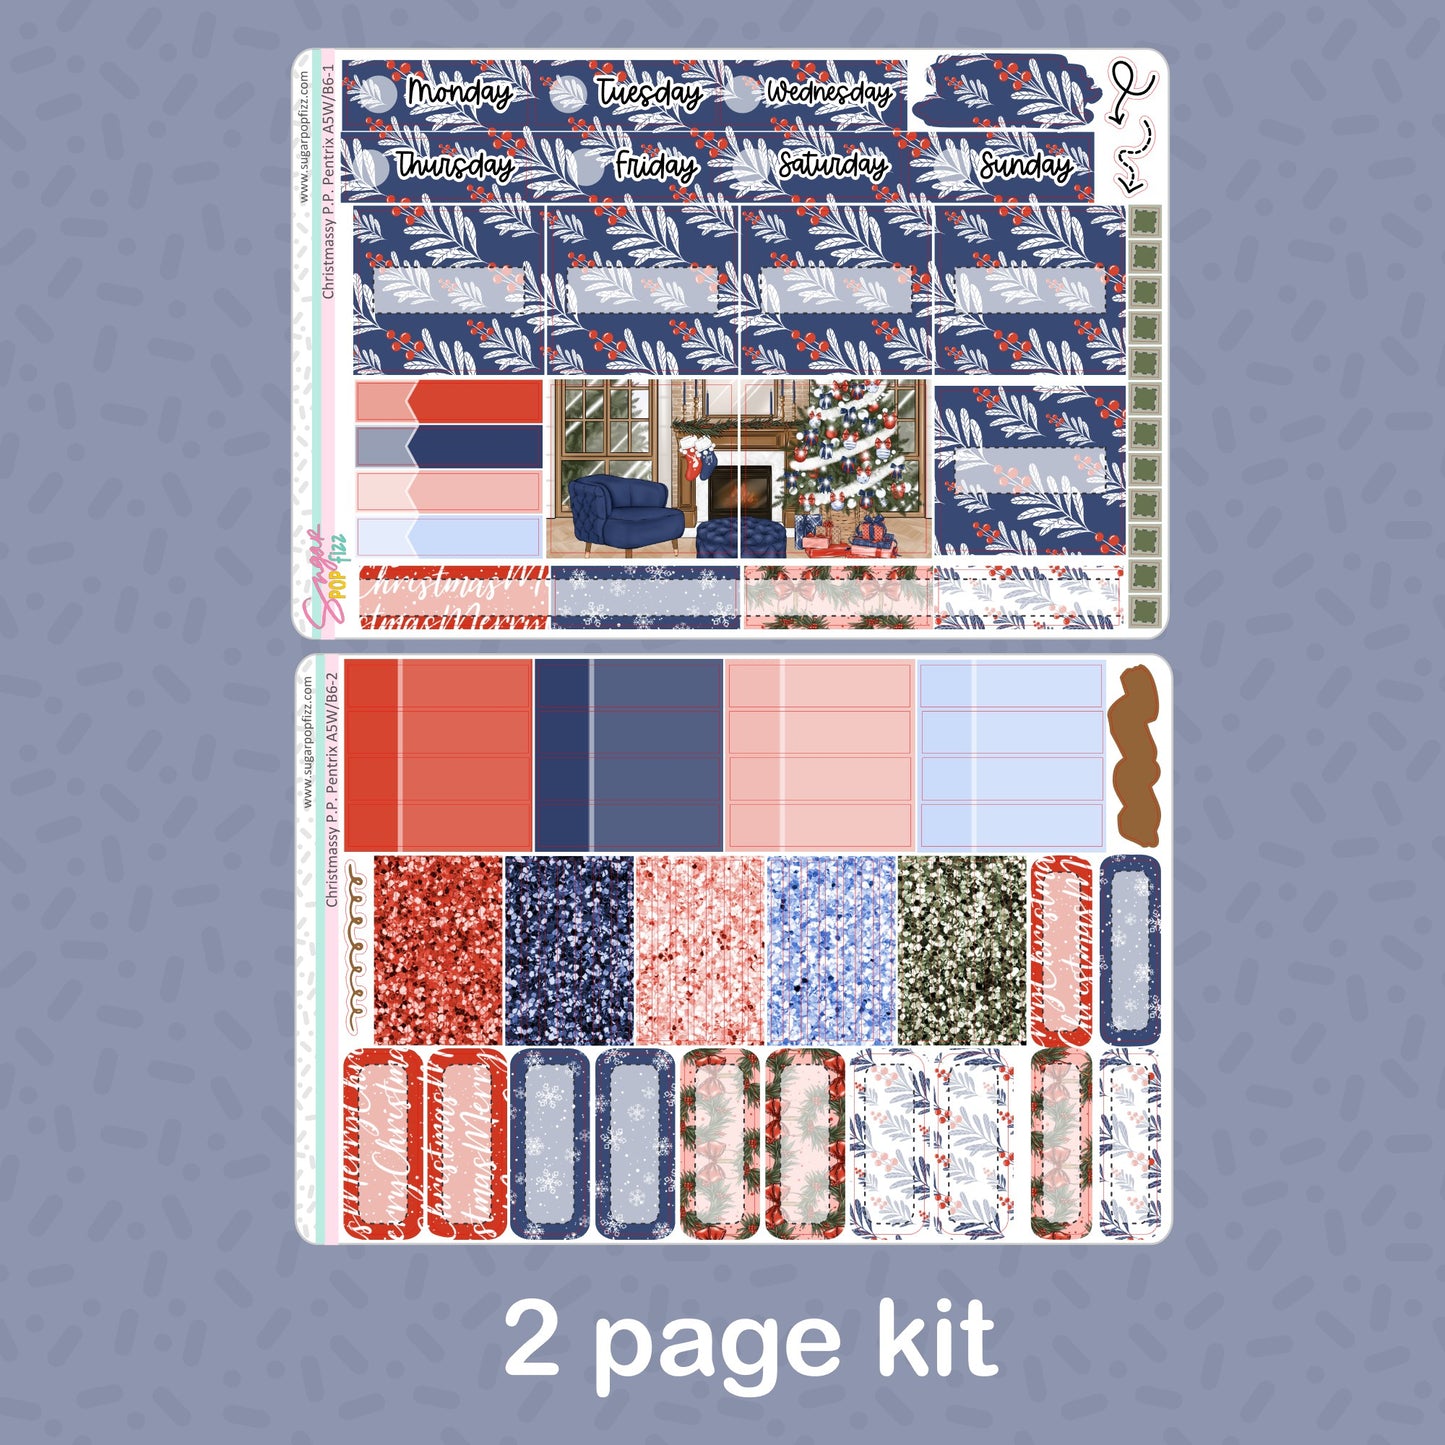 Christmassy Penny Pages Pentrix Weekly Kit